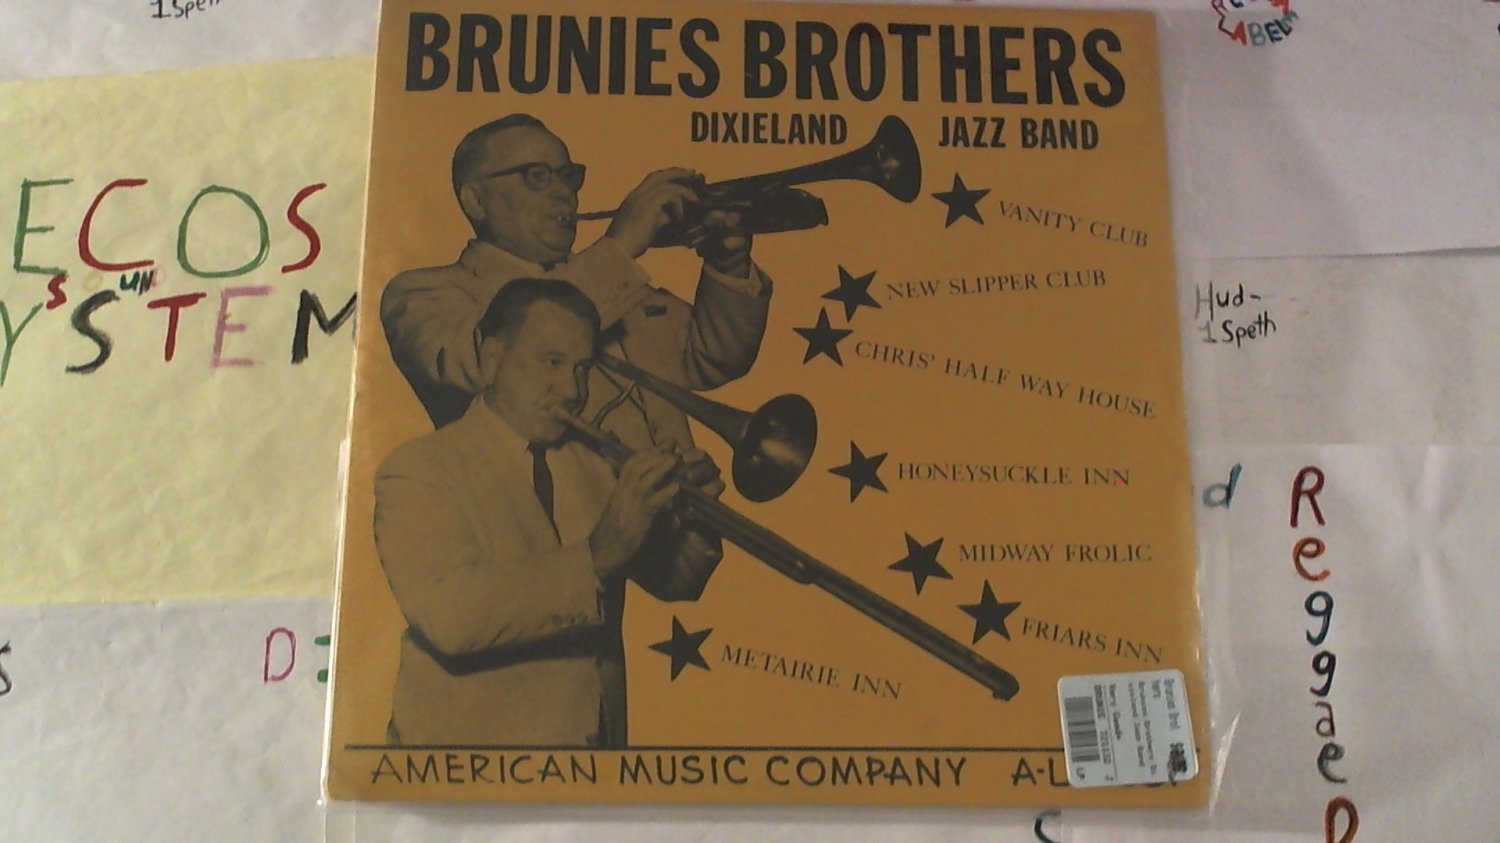 artist: Brunies Brothers title: Dixieland Jazz Band label: American Music Co. (Used) LP